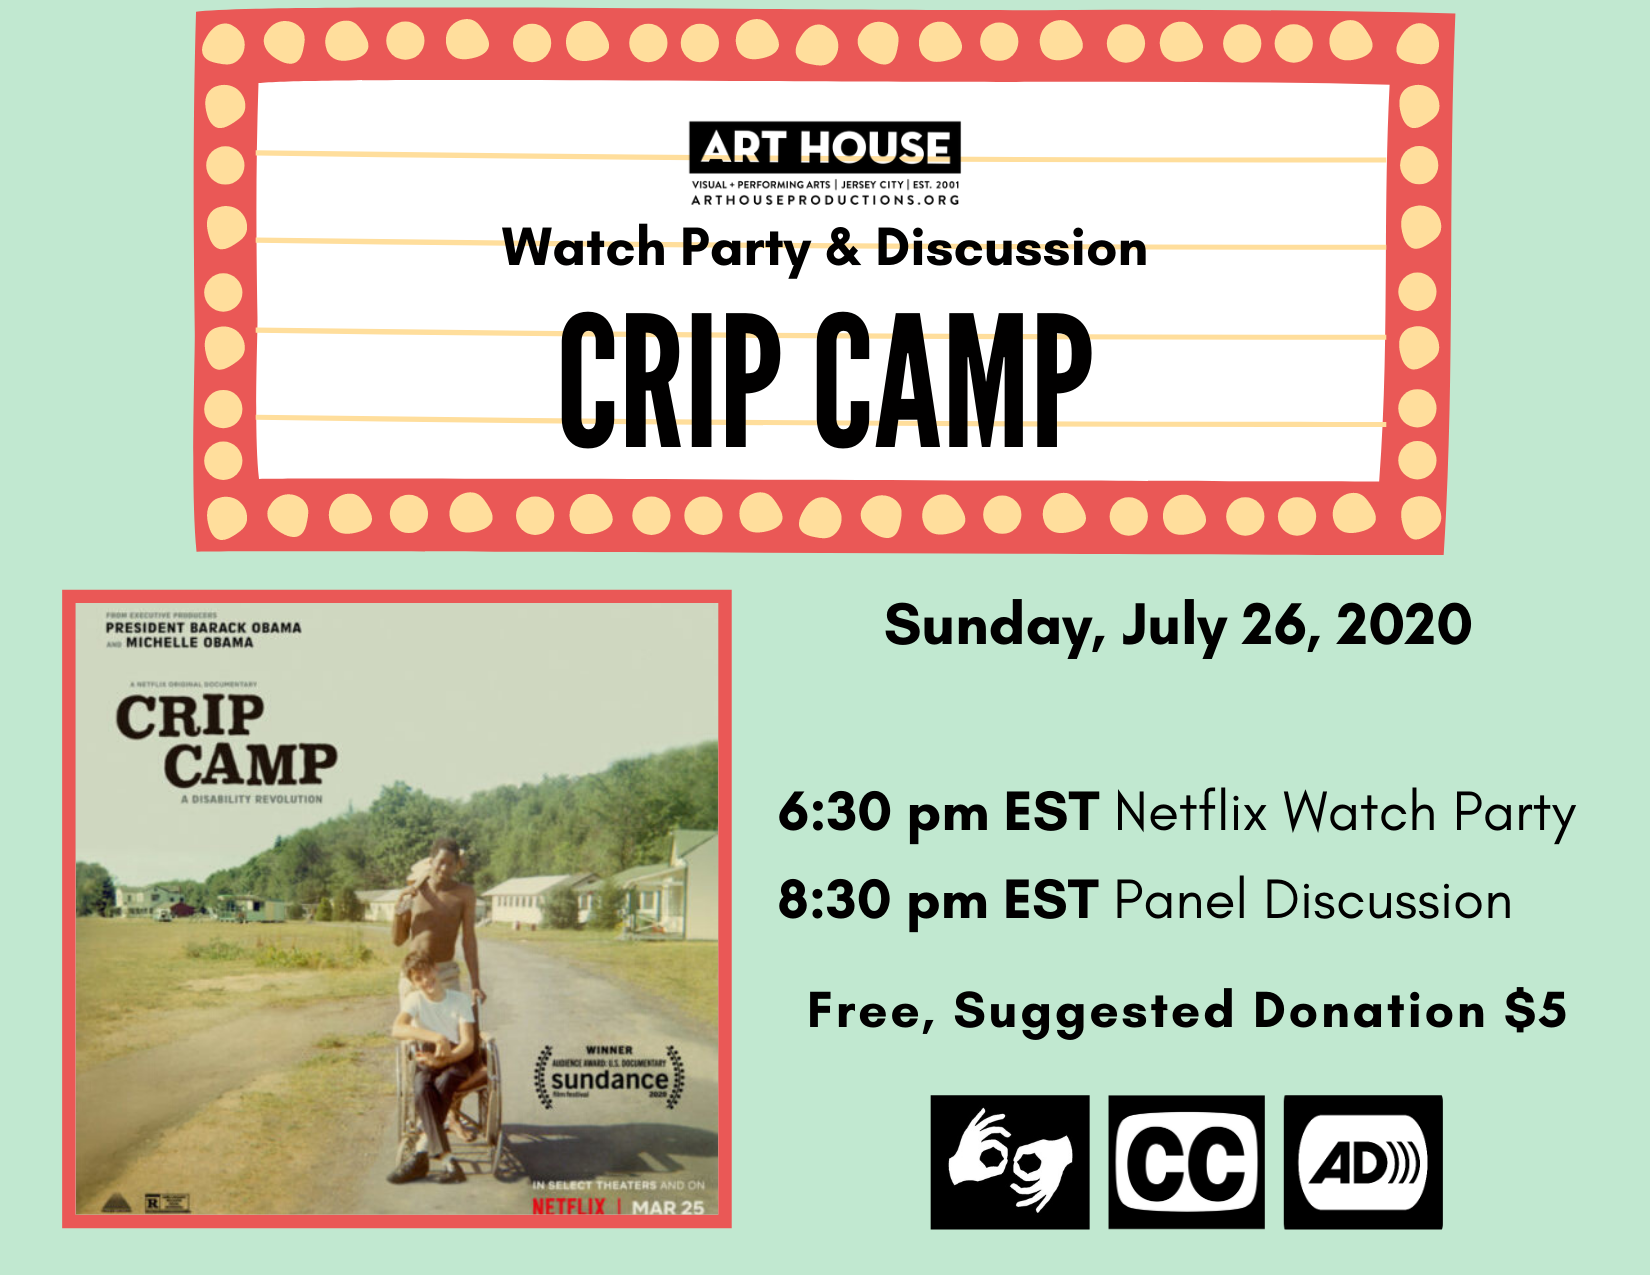 Flyer for Crip Camp Watch Party and Discussion; Sunday, July 26 2020, 6:30pm EsT Netflix Watch Party, 8:30 PM EST Panel Discussion. Free